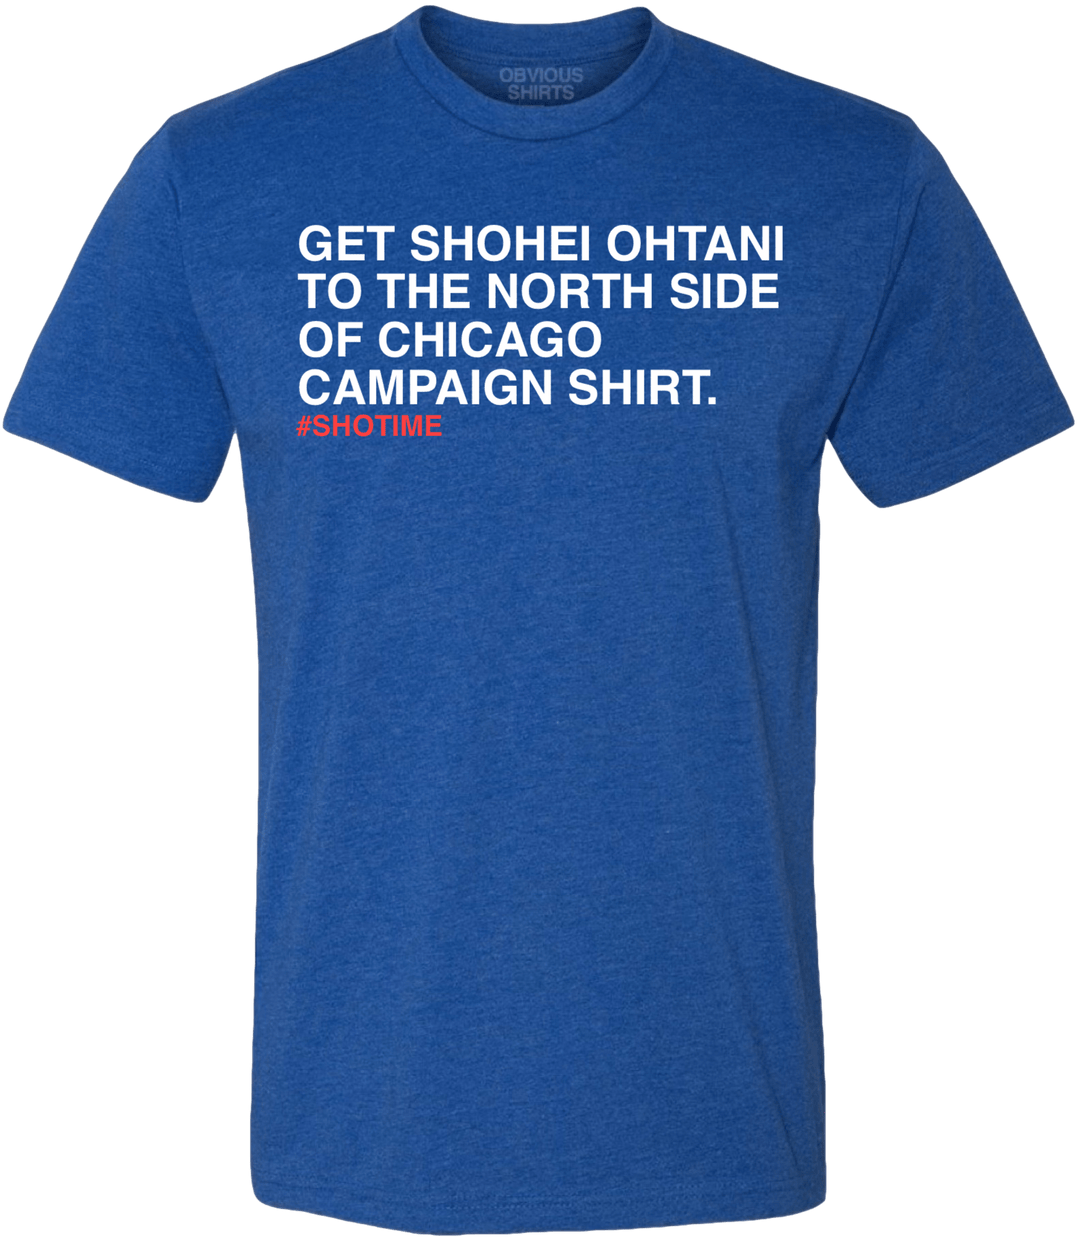 SHOHEI OHTANI TO THE NORTHSIDE CAMPAIGN SHIRT. - OBVIOUS SHIRTS